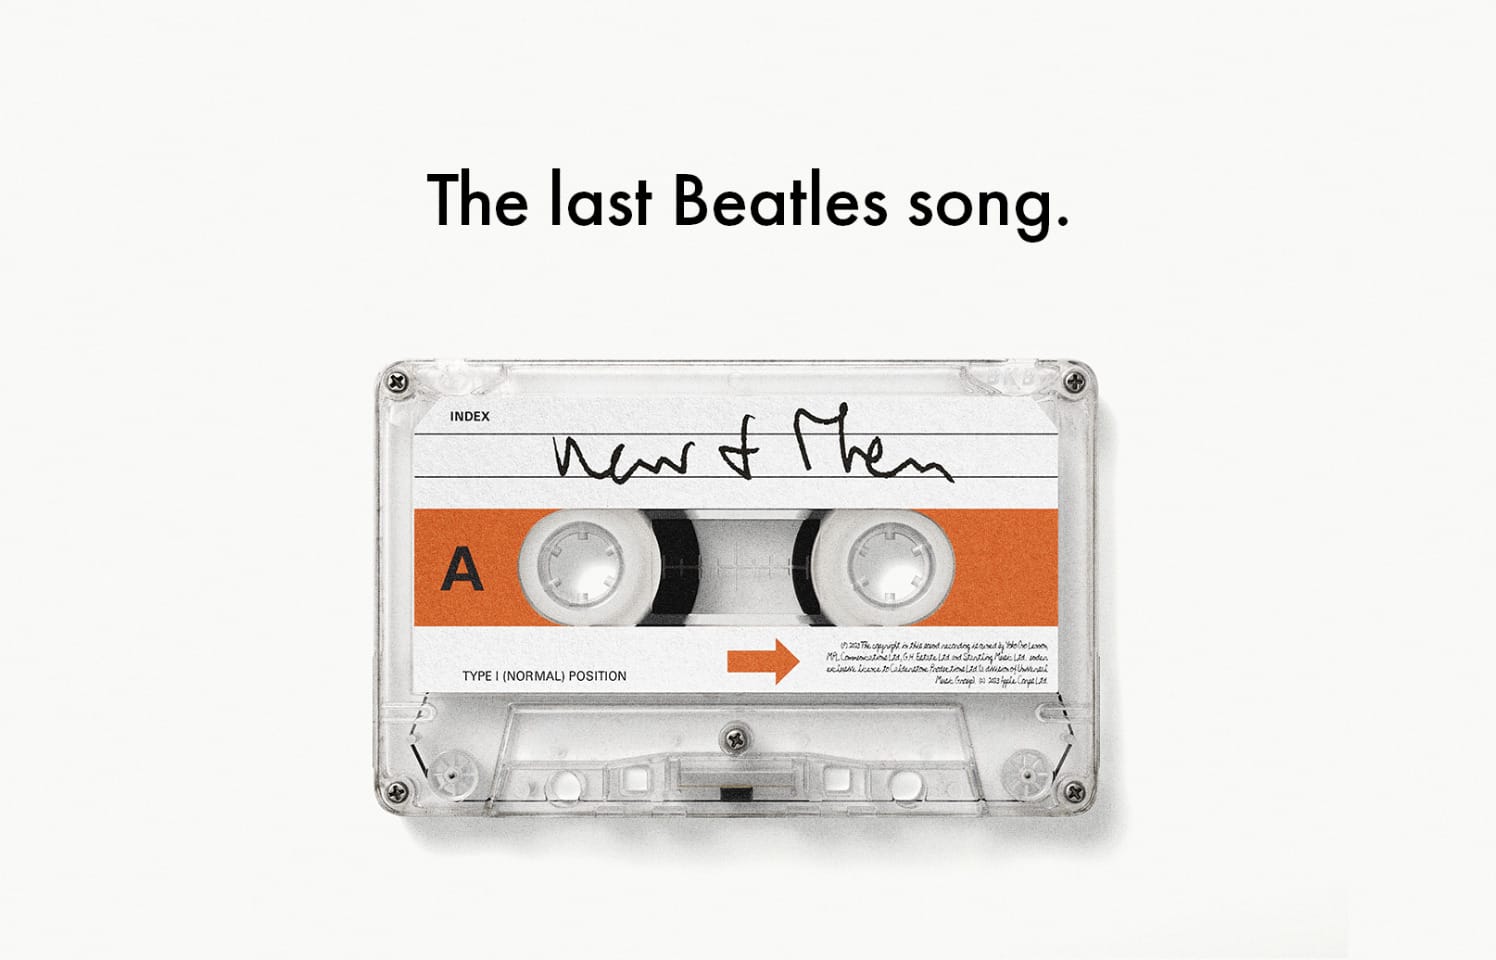 The Beatles Announce Final Song “Now and Then”